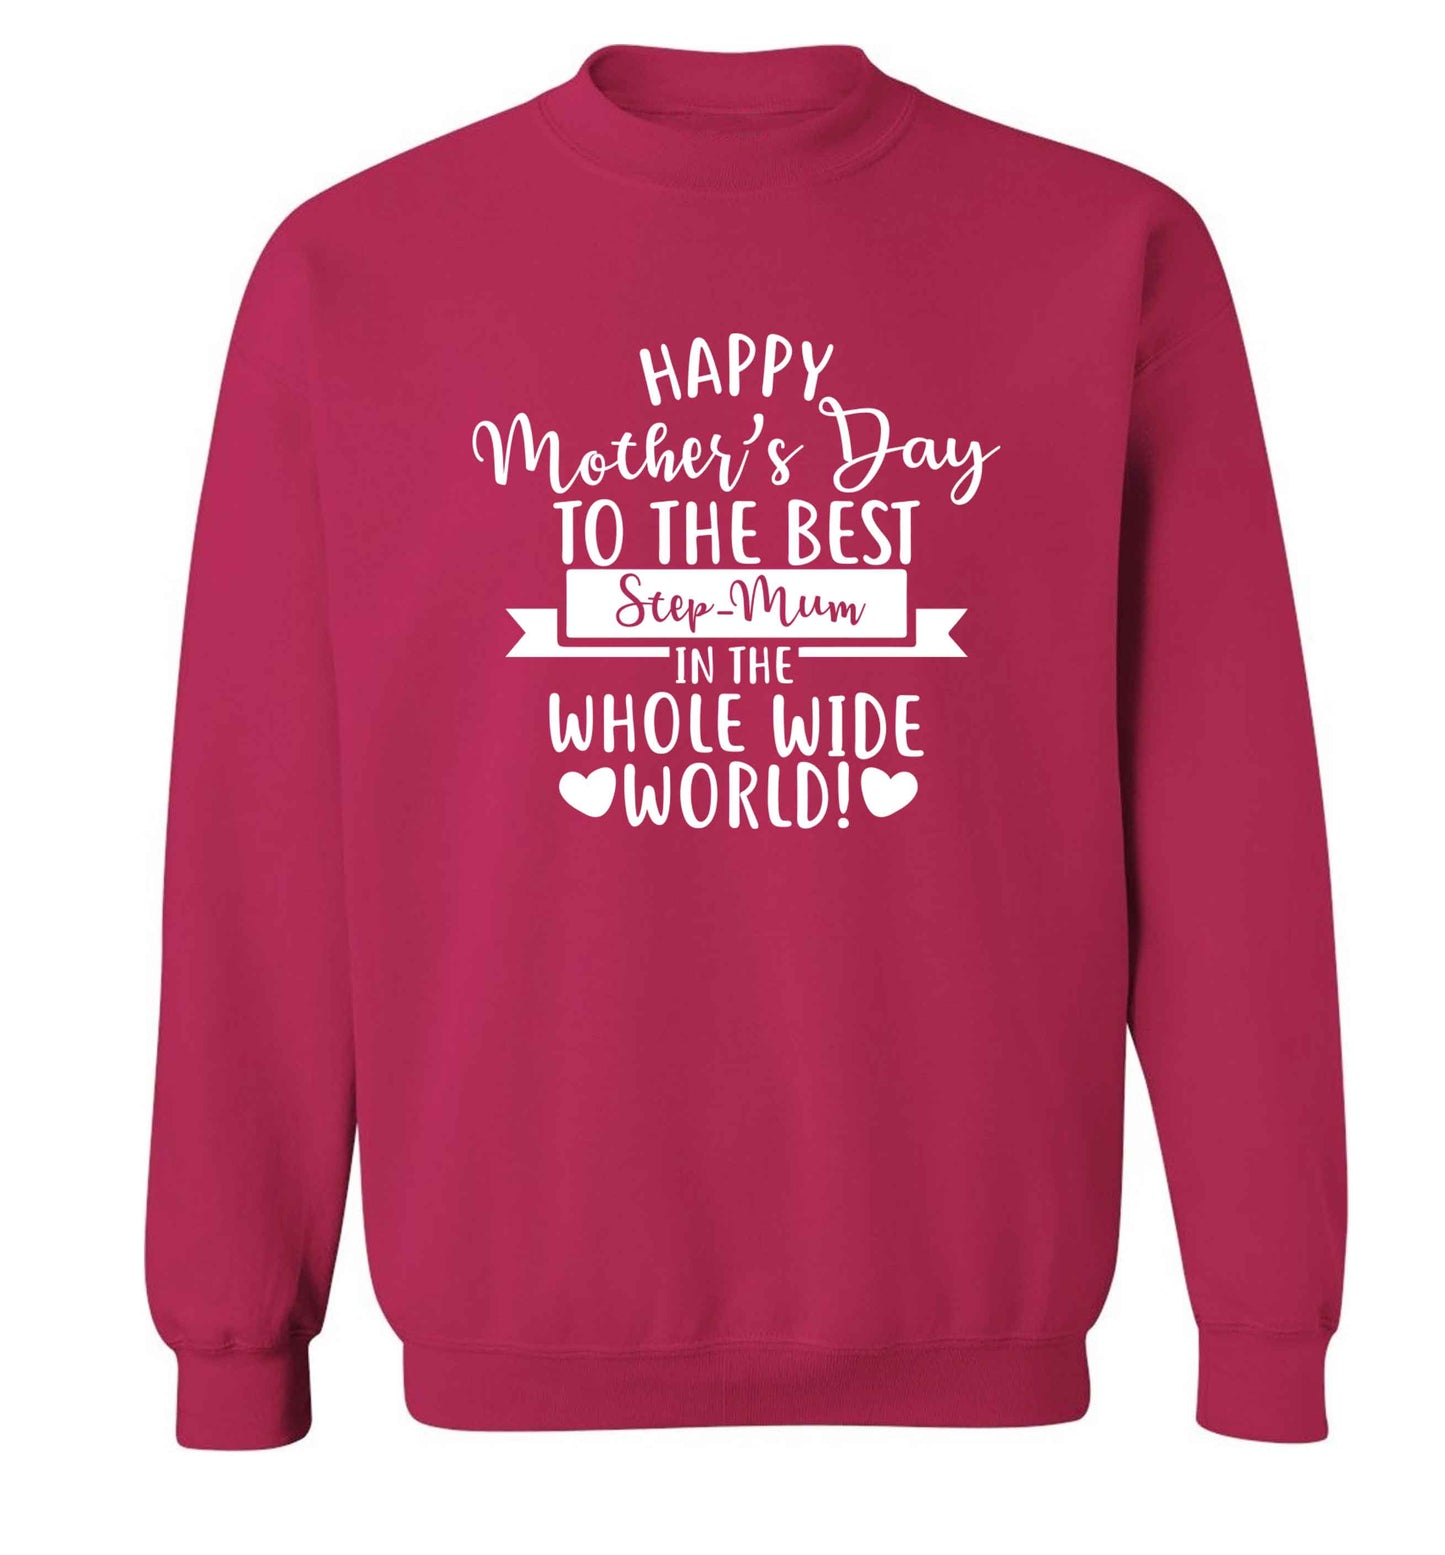 Happy mother's day to the best step-mum in the world adult's unisex pink sweater 2XL